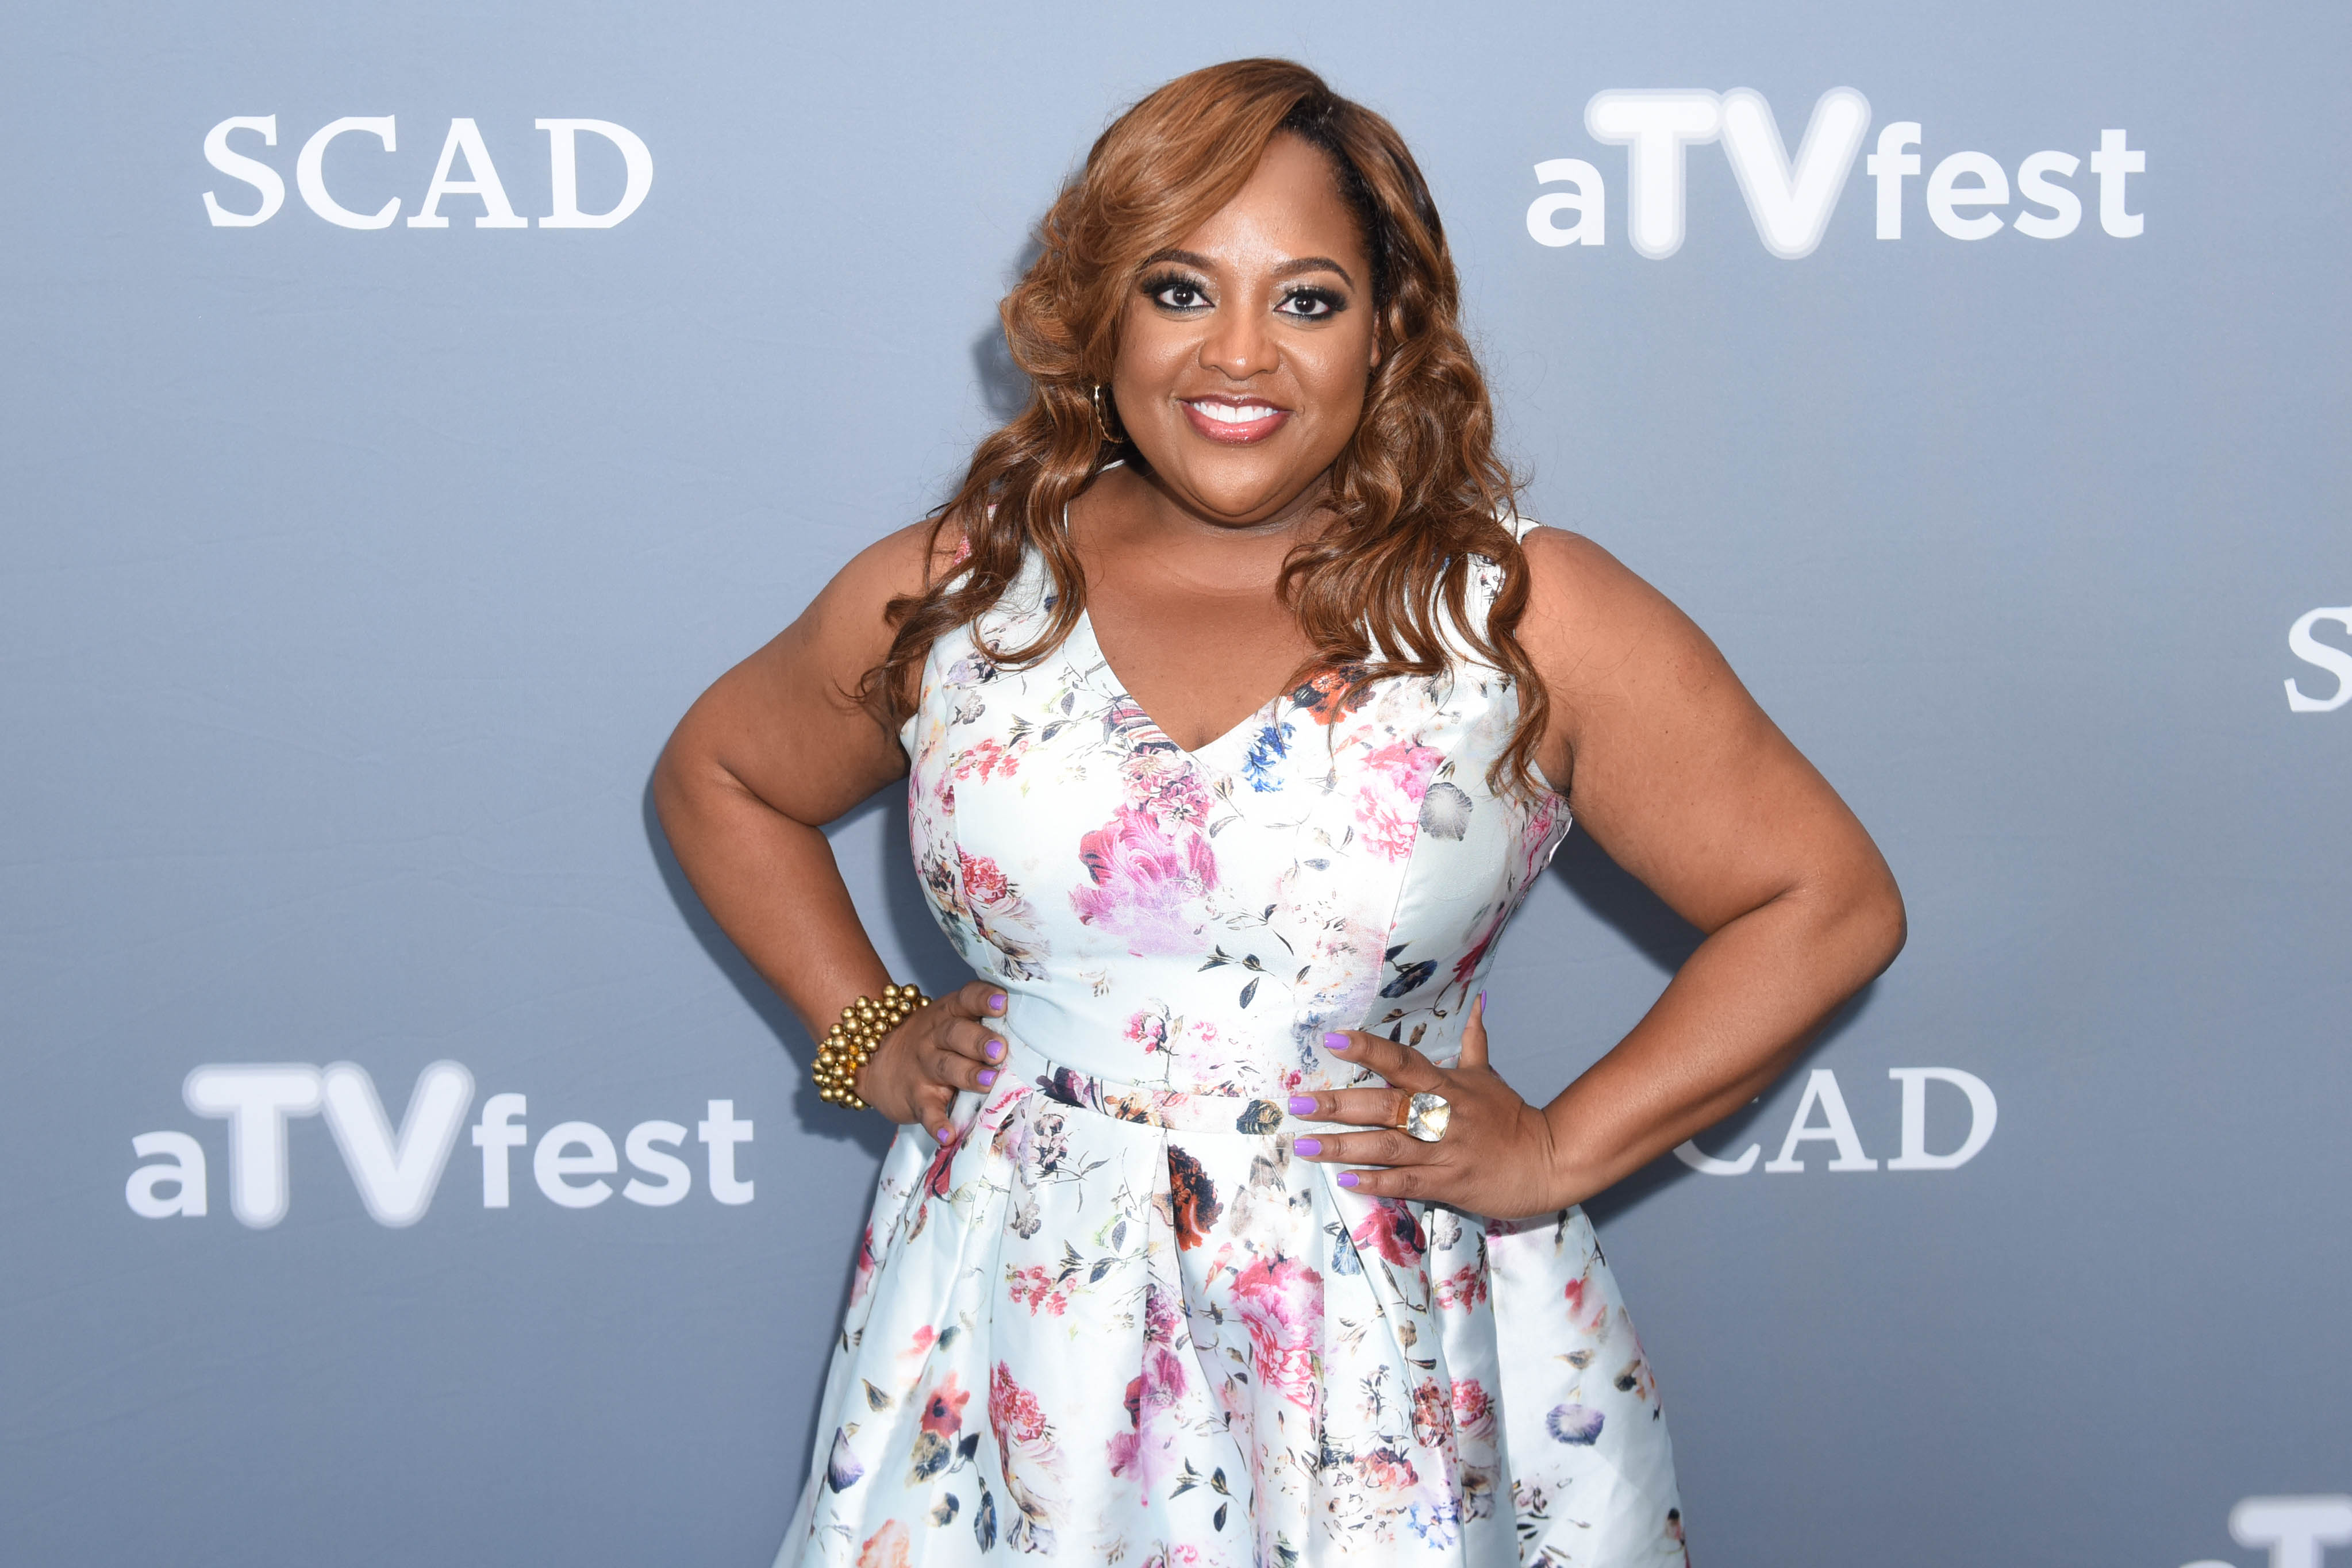 Sherri Shepherd at a promotional event for Trial & Error at aTVfest 2017 presented by SCAD on February 3, 2017. | Photo: Getty Images